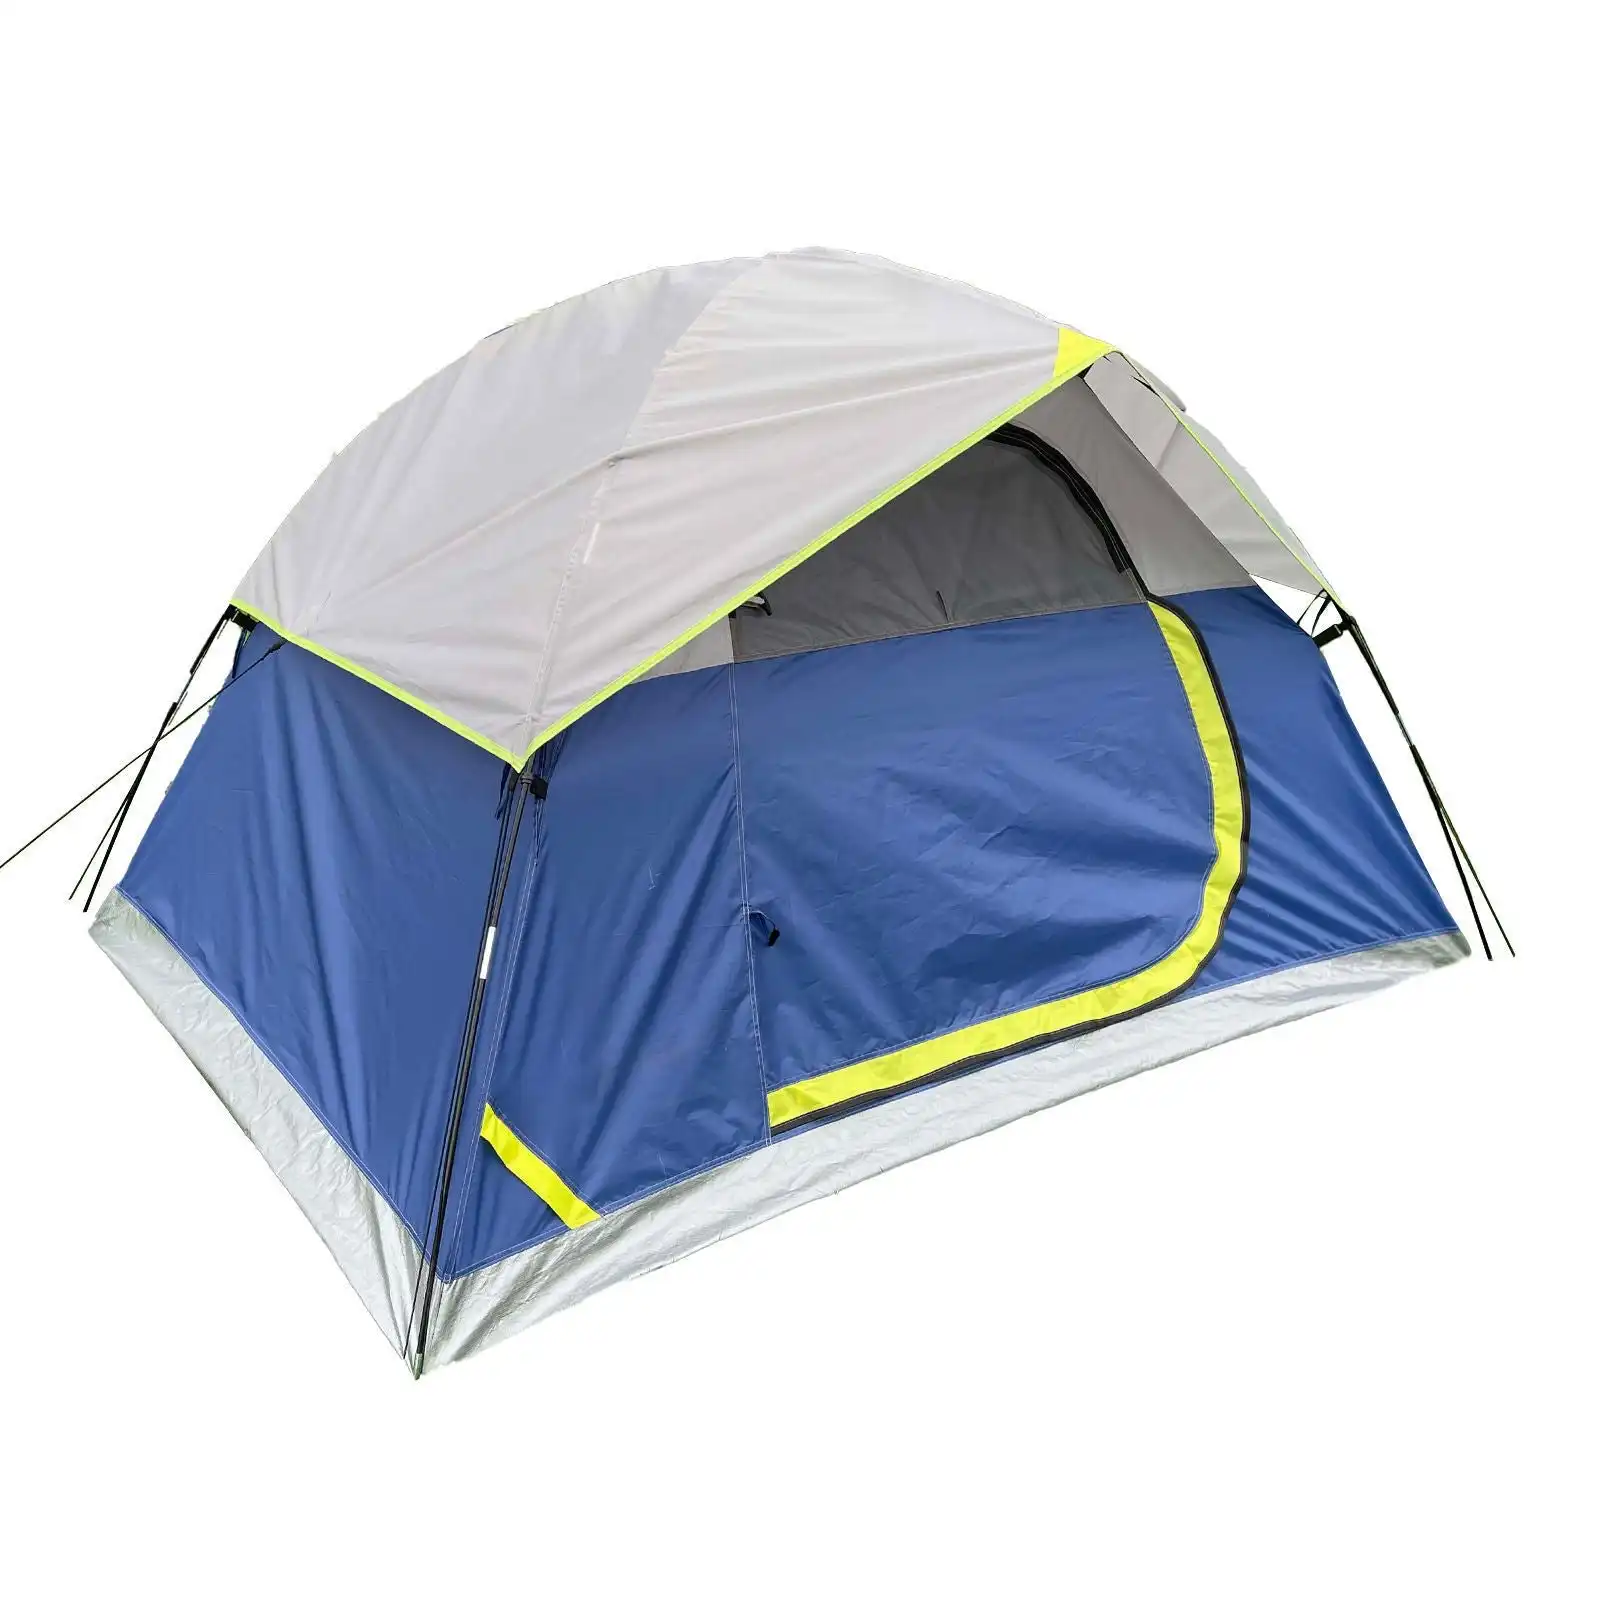 Havana Outdoors 2-3 Person Tent Lightweight Hiking Backpacking Camping